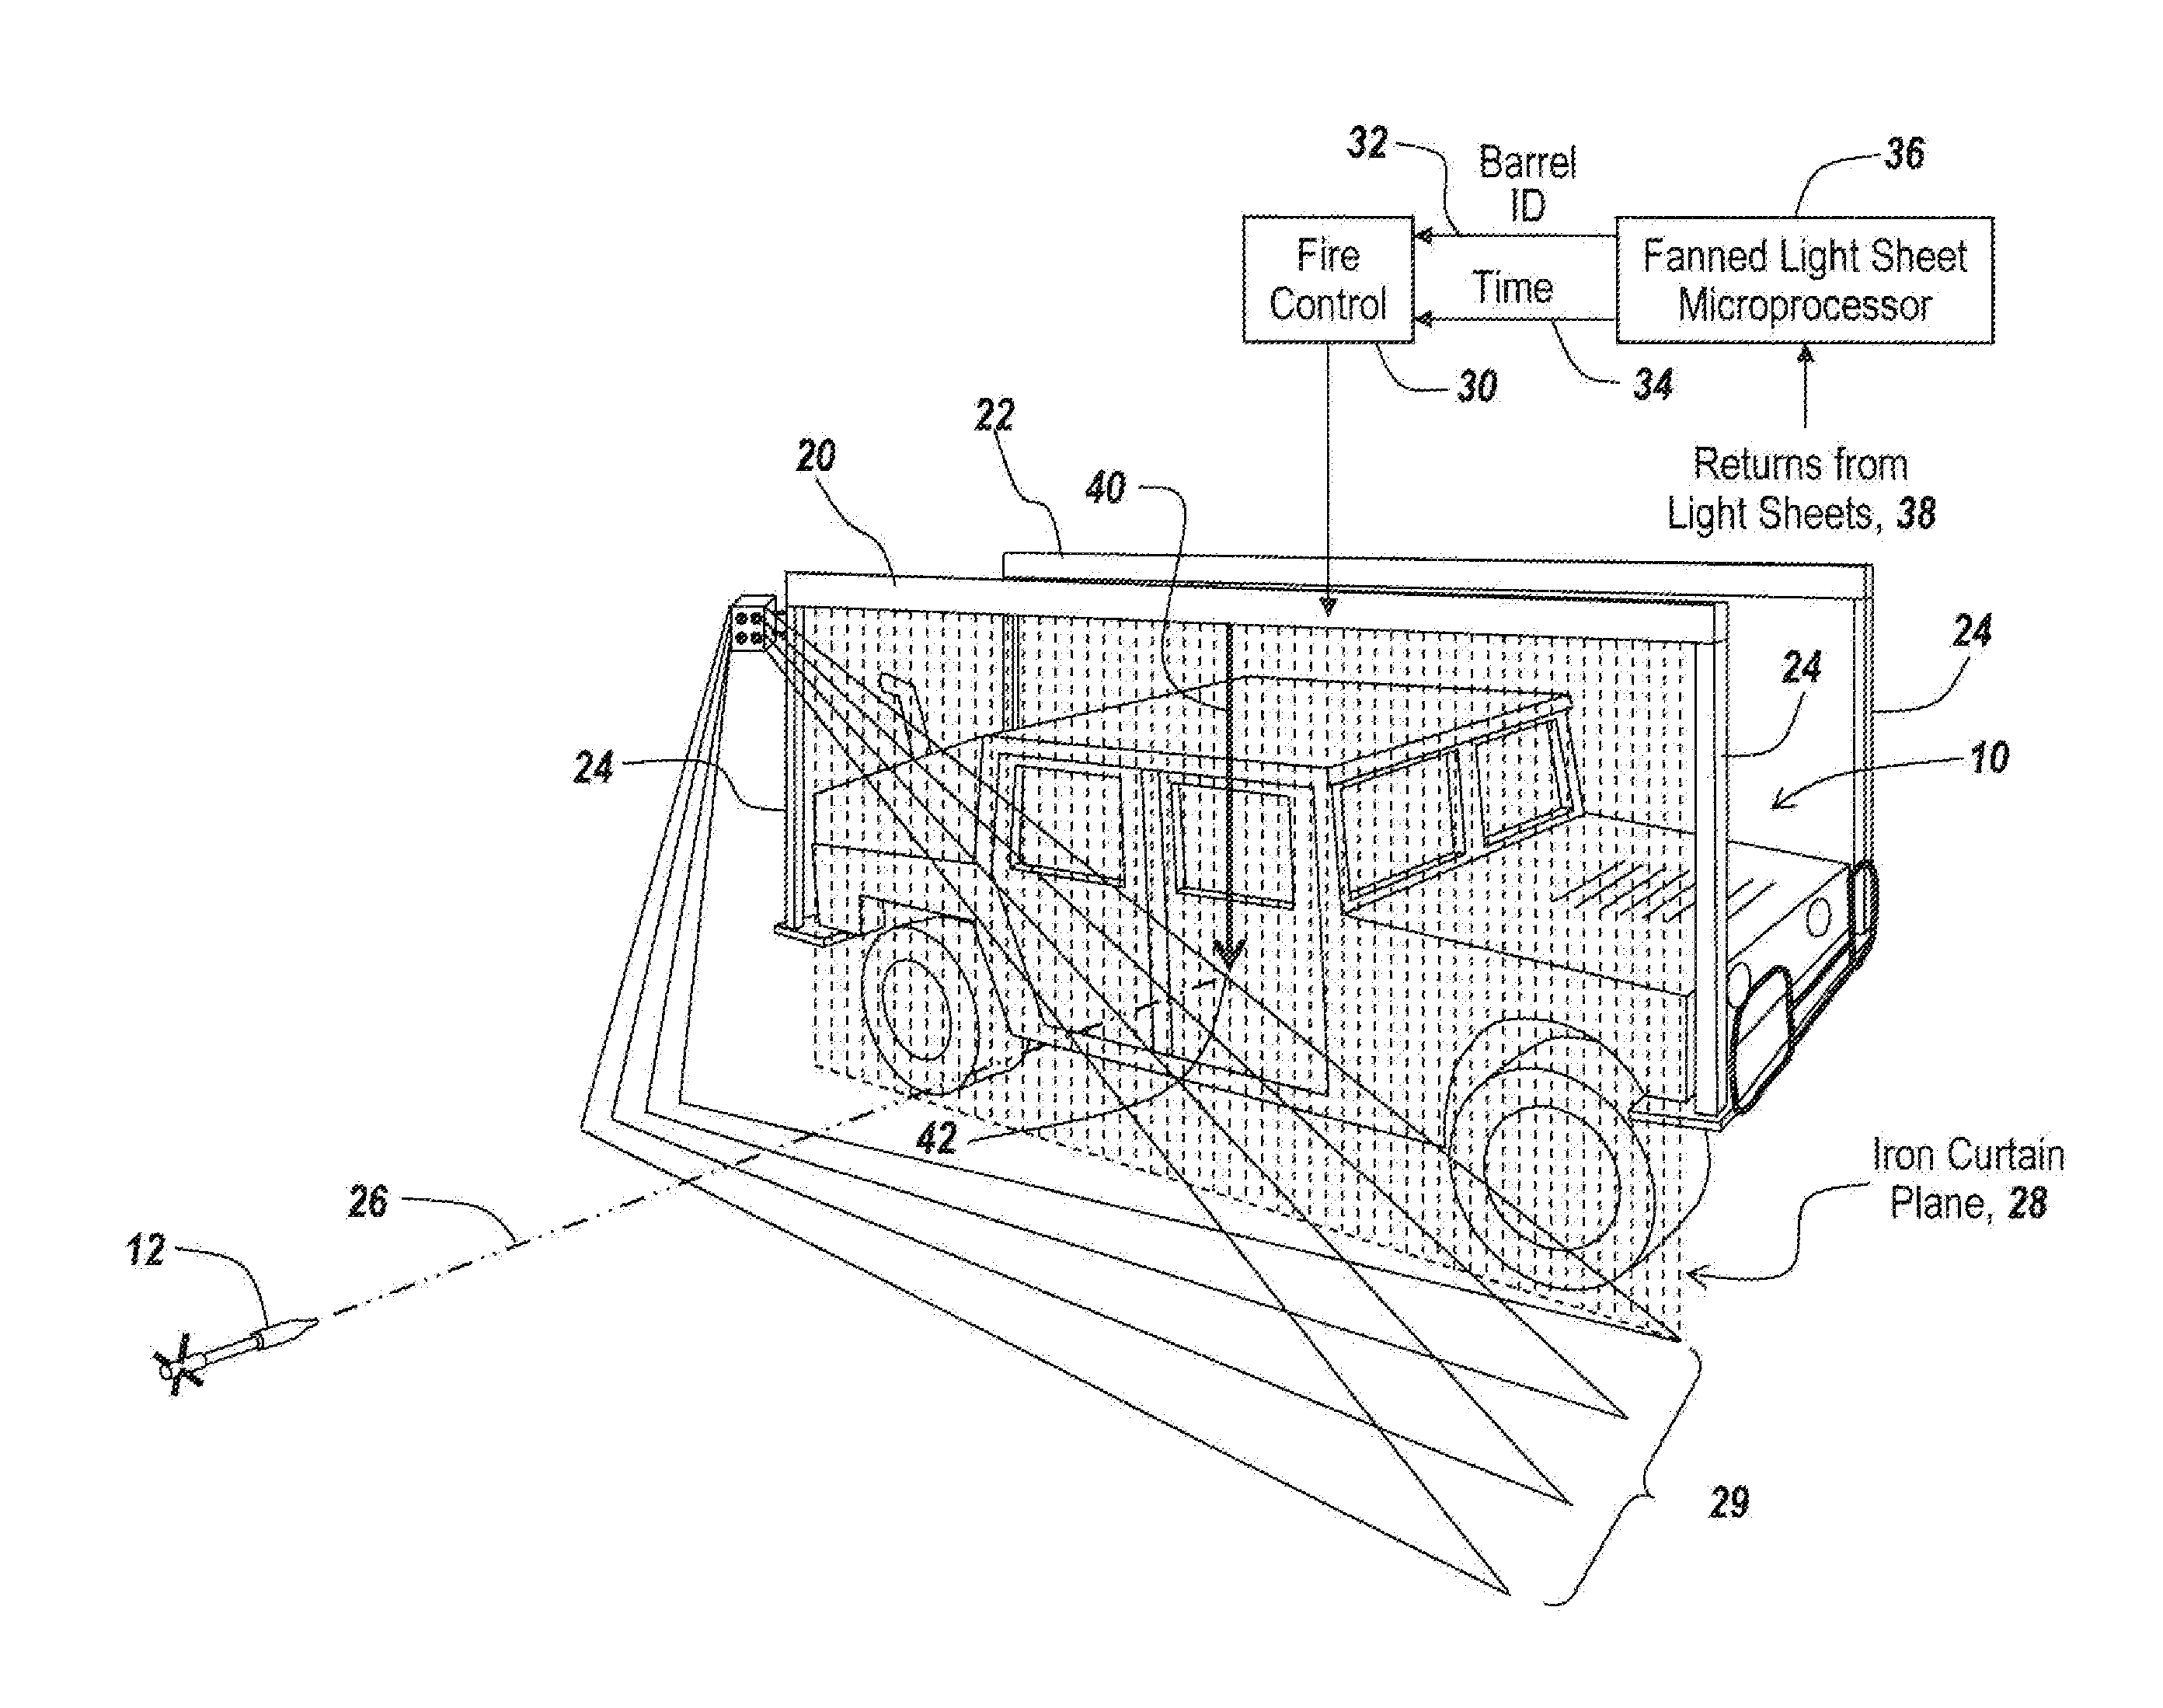 Method And Apparatus For Protecting Vehicles And Personnel Against Incoming Projectiles